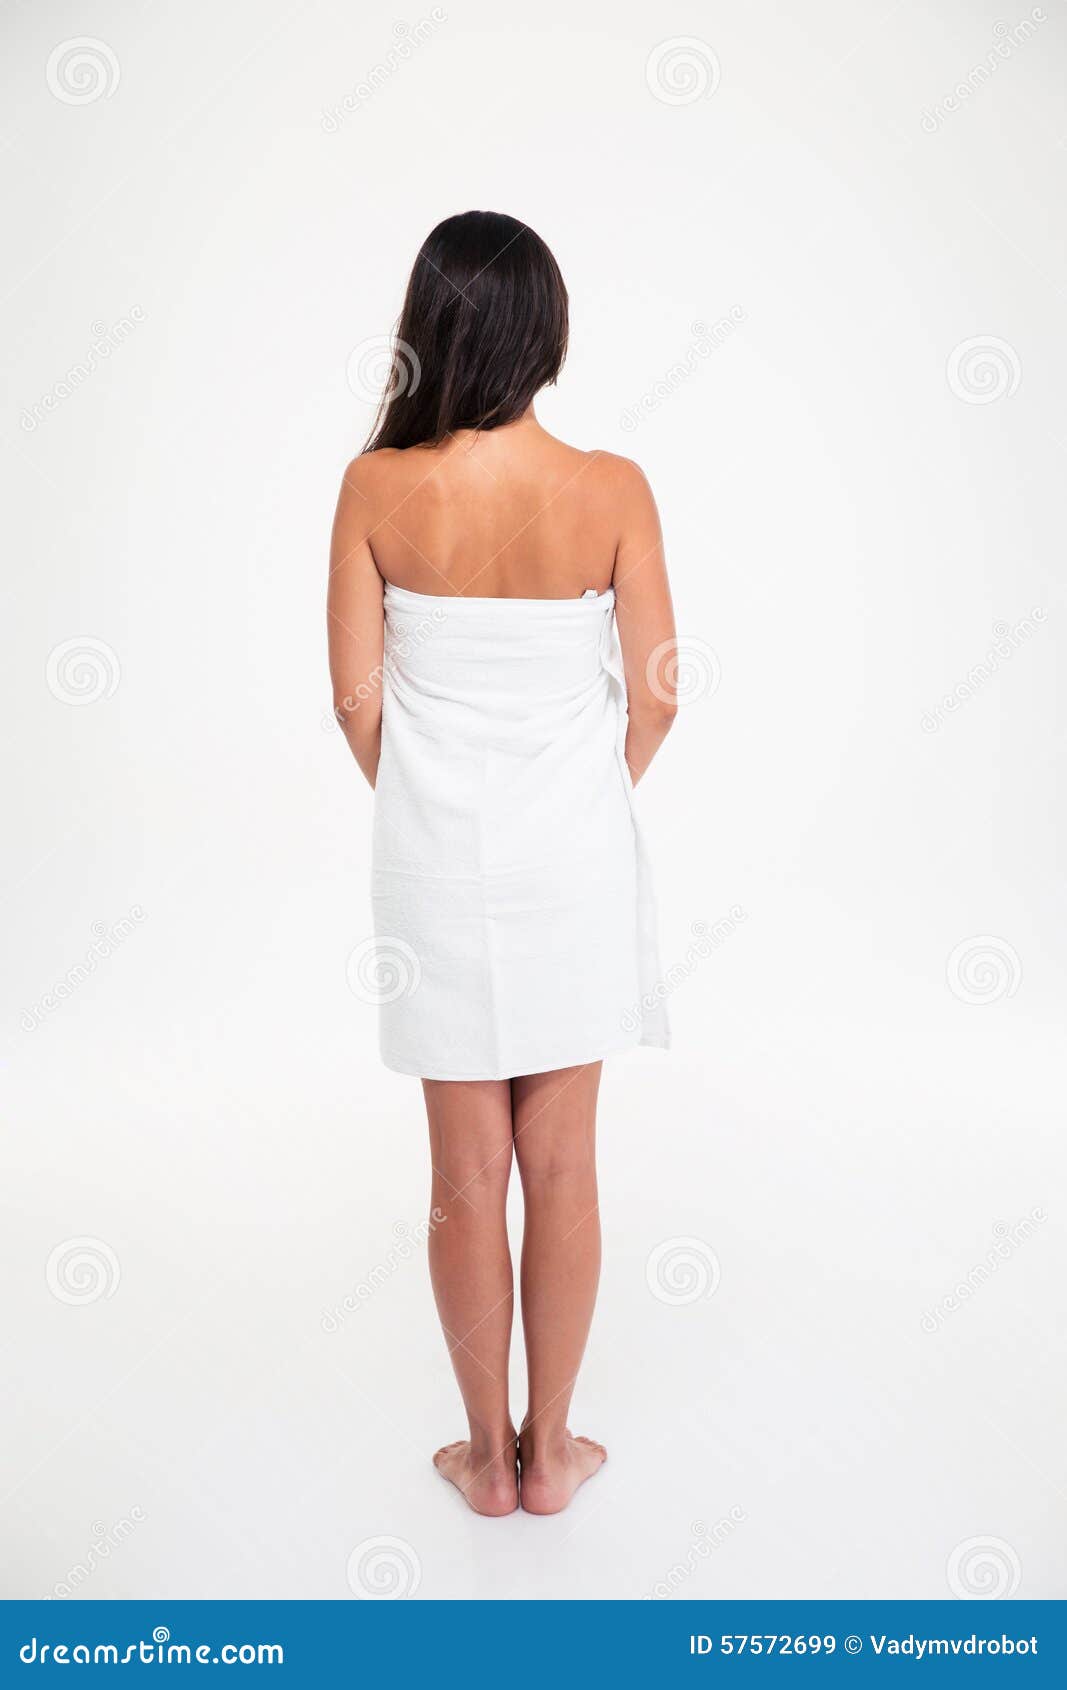 https://thumbs.dreamstime.com/z/back-view-portrait-woman-fresh-skin-standing-towel-isolated-white-background-57572699.jpg